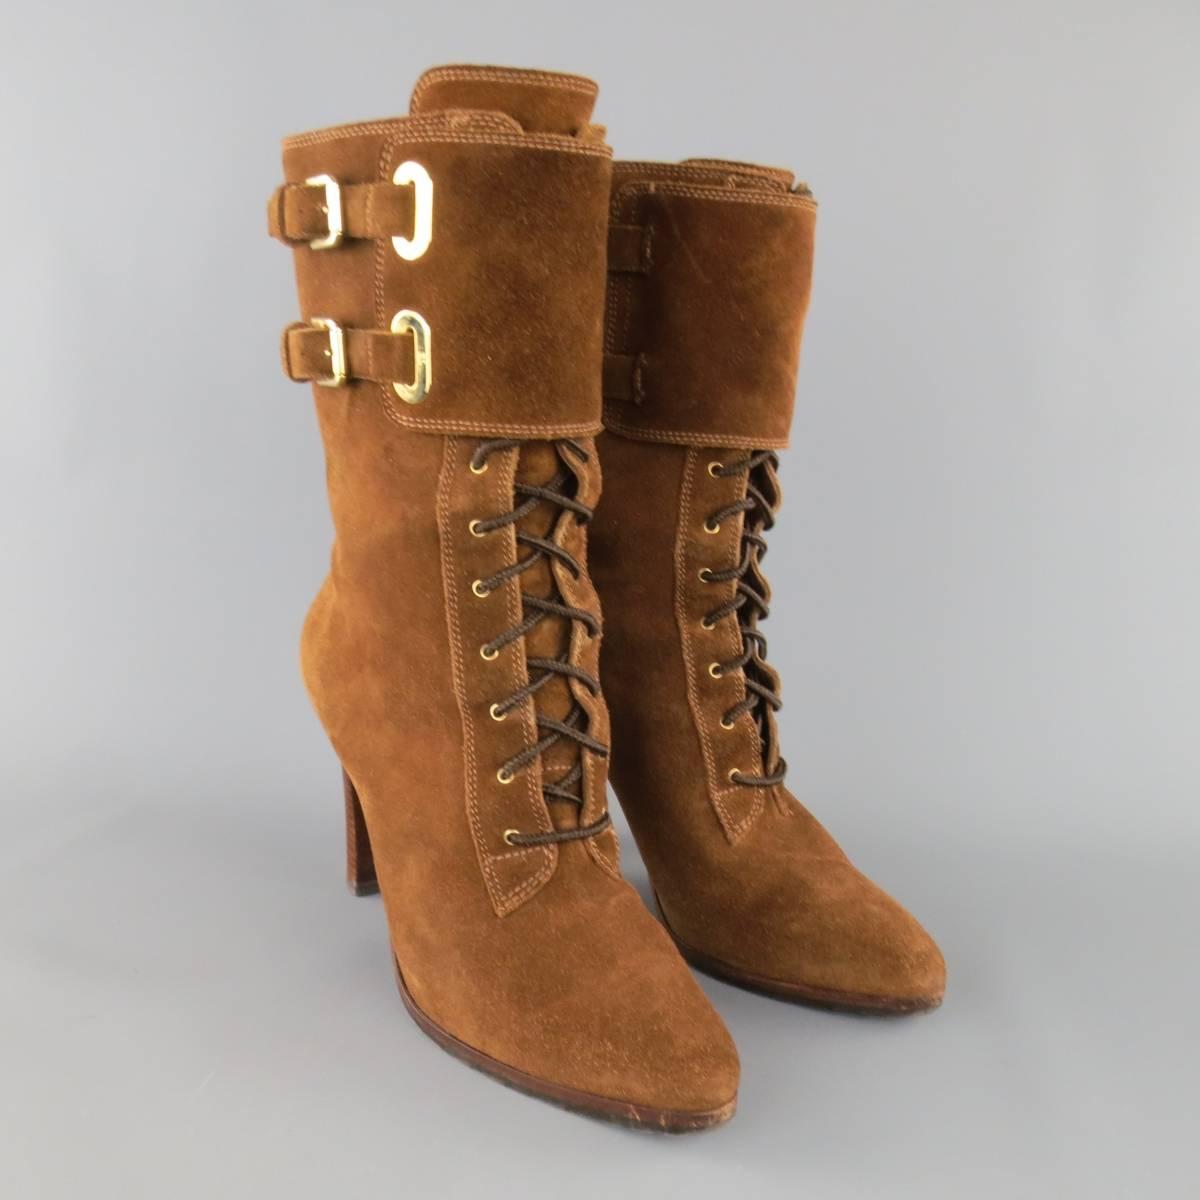 RALPH LAUREN COLLECTION boots come in rich brown suede and feature a pointed toe, lace up front with hooks, thick ankle strap with double gold tone buckle hardware, and stacked high heel.
 
Excellent Pre-Owned Condition.
Marked: 7.5 B
 
Heel: 4